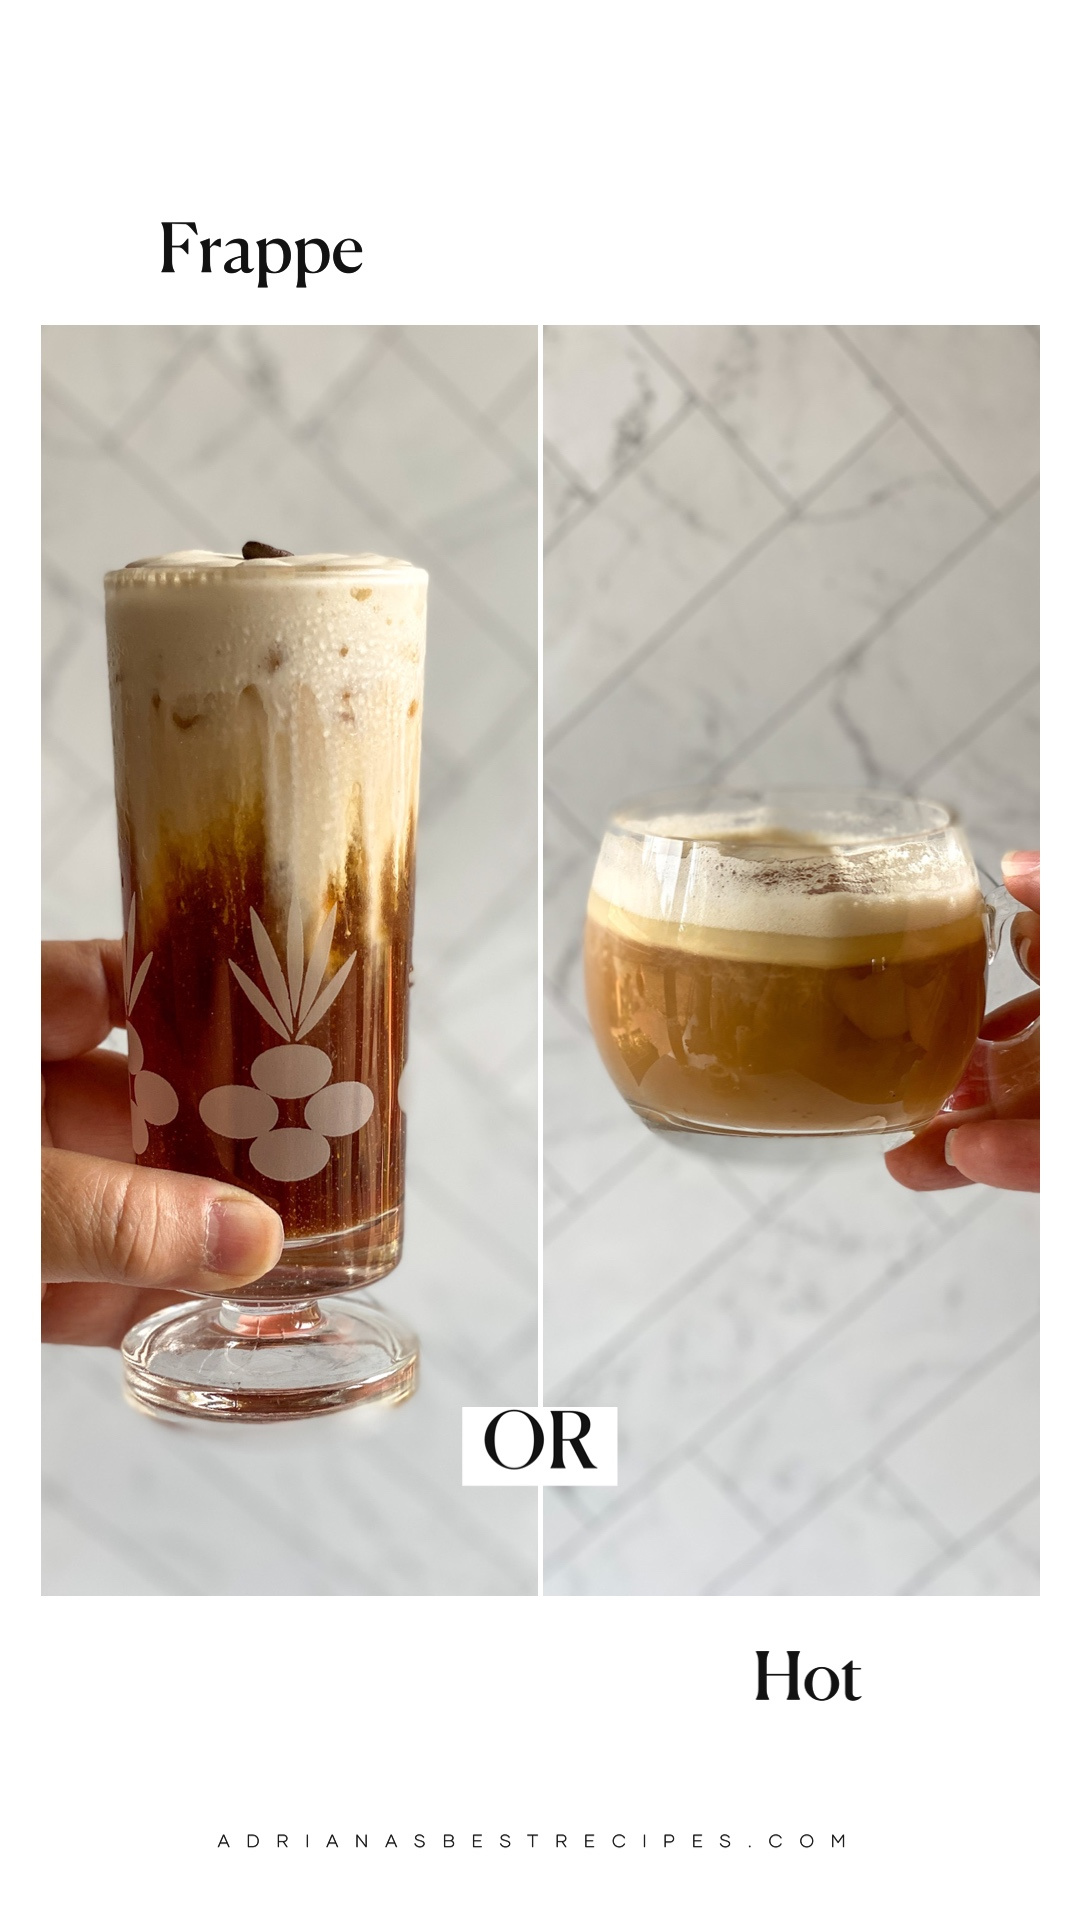 A collage showing one frappe coffee and one foamy hot spiked coffee